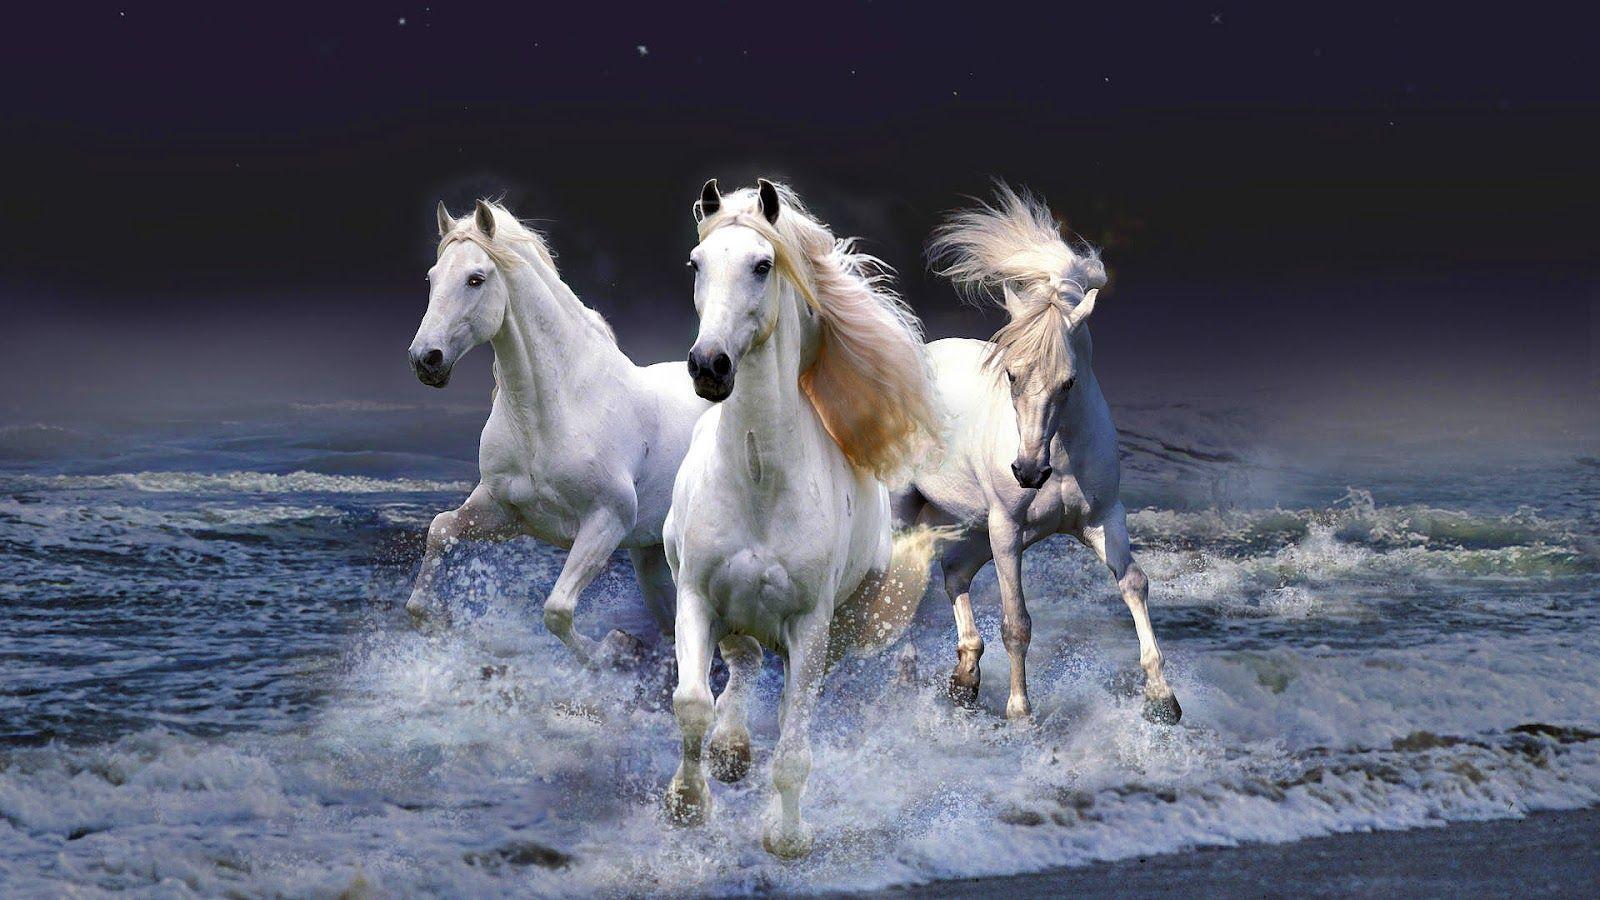 White Horse Running On Beach Wallpapers - Wallpaper Cave